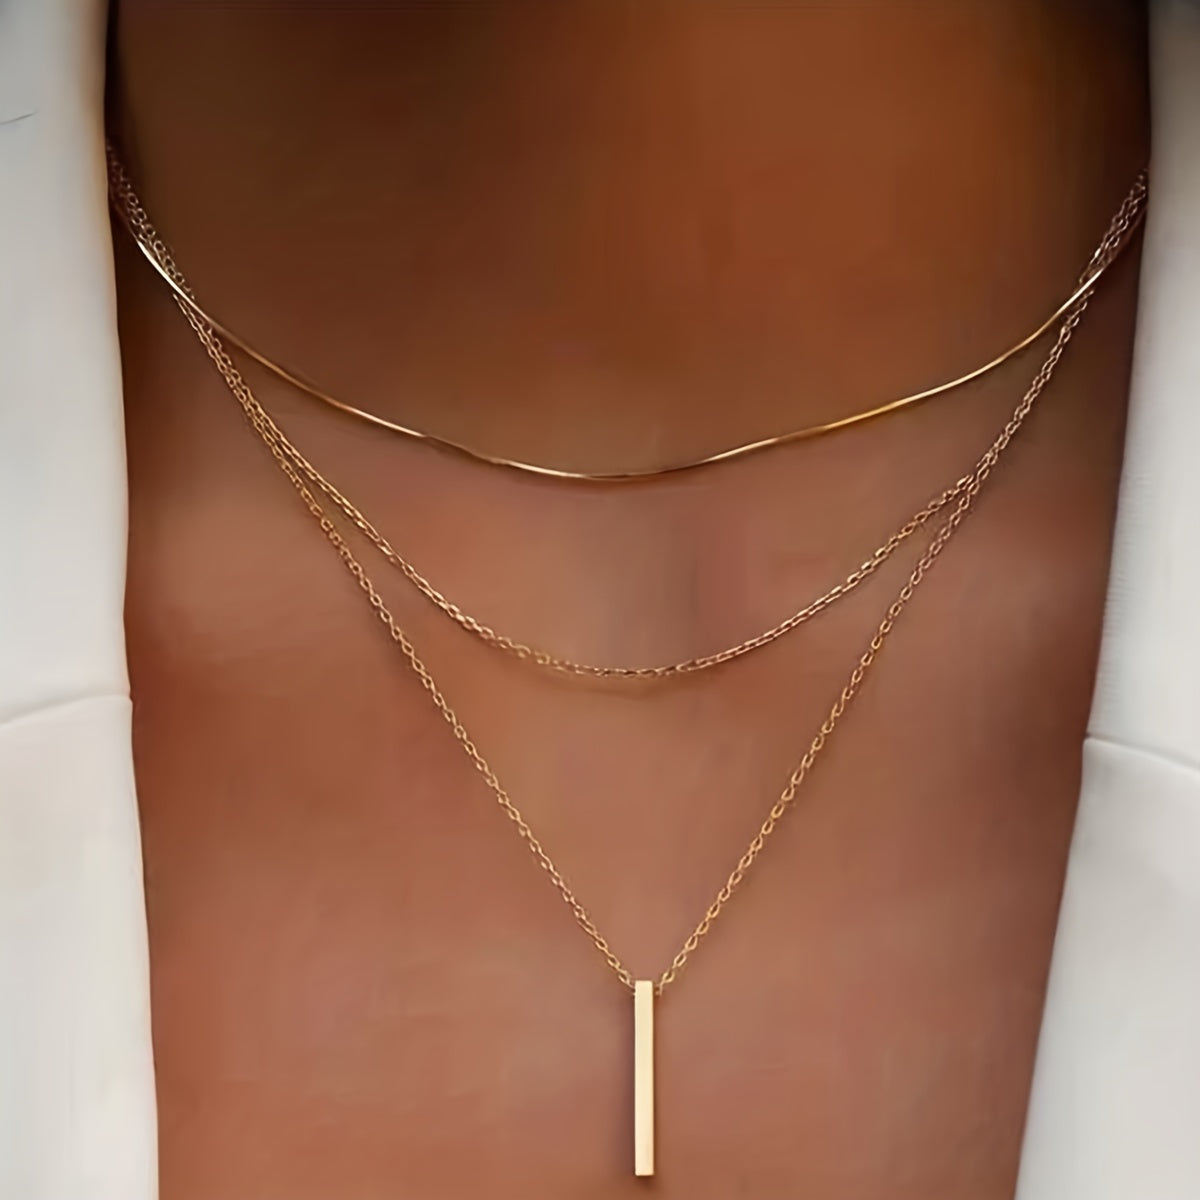 Simple Long Strip Pendant Multilayer Necklace Minimalist Style Necklace Jewelry Gift